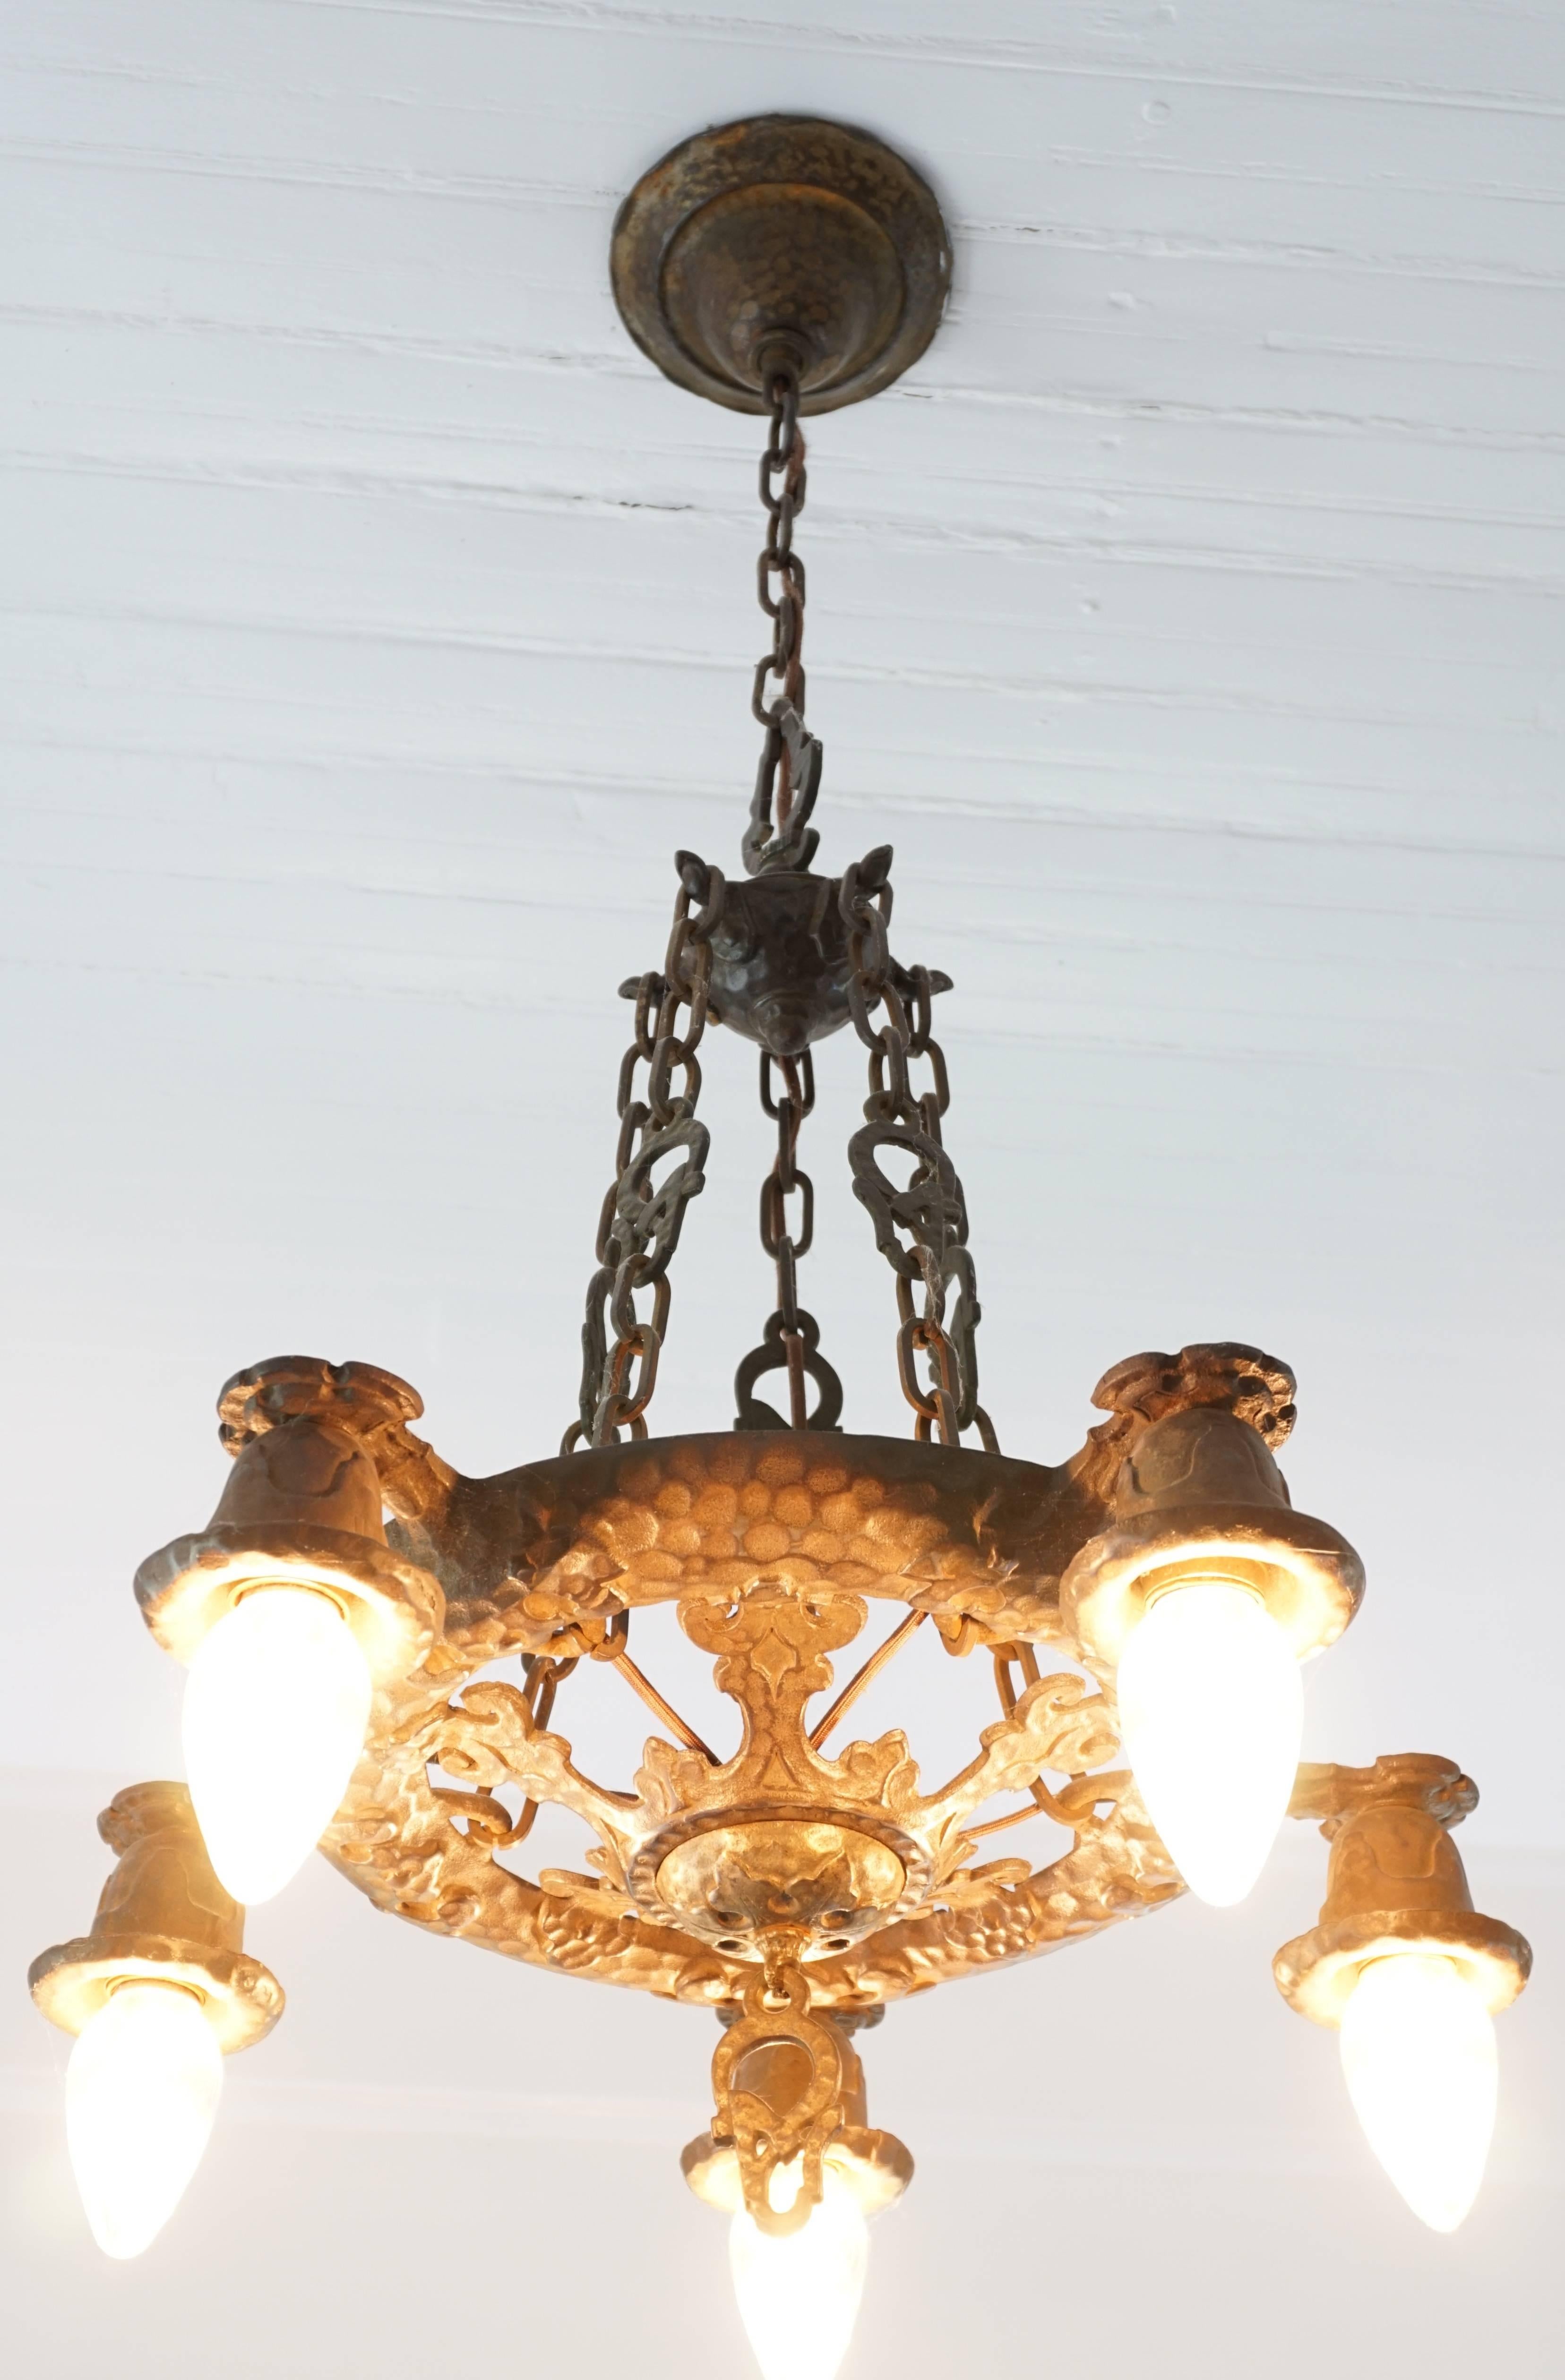 Arts & Crafts wrought cast iron hammered chandelier, circa 1900. From England or possibly American. Beautiful condition with a chocolate brown patina and hidden goals undertones. Five-light Chandelier lighting fixture.

Measures: Height 35